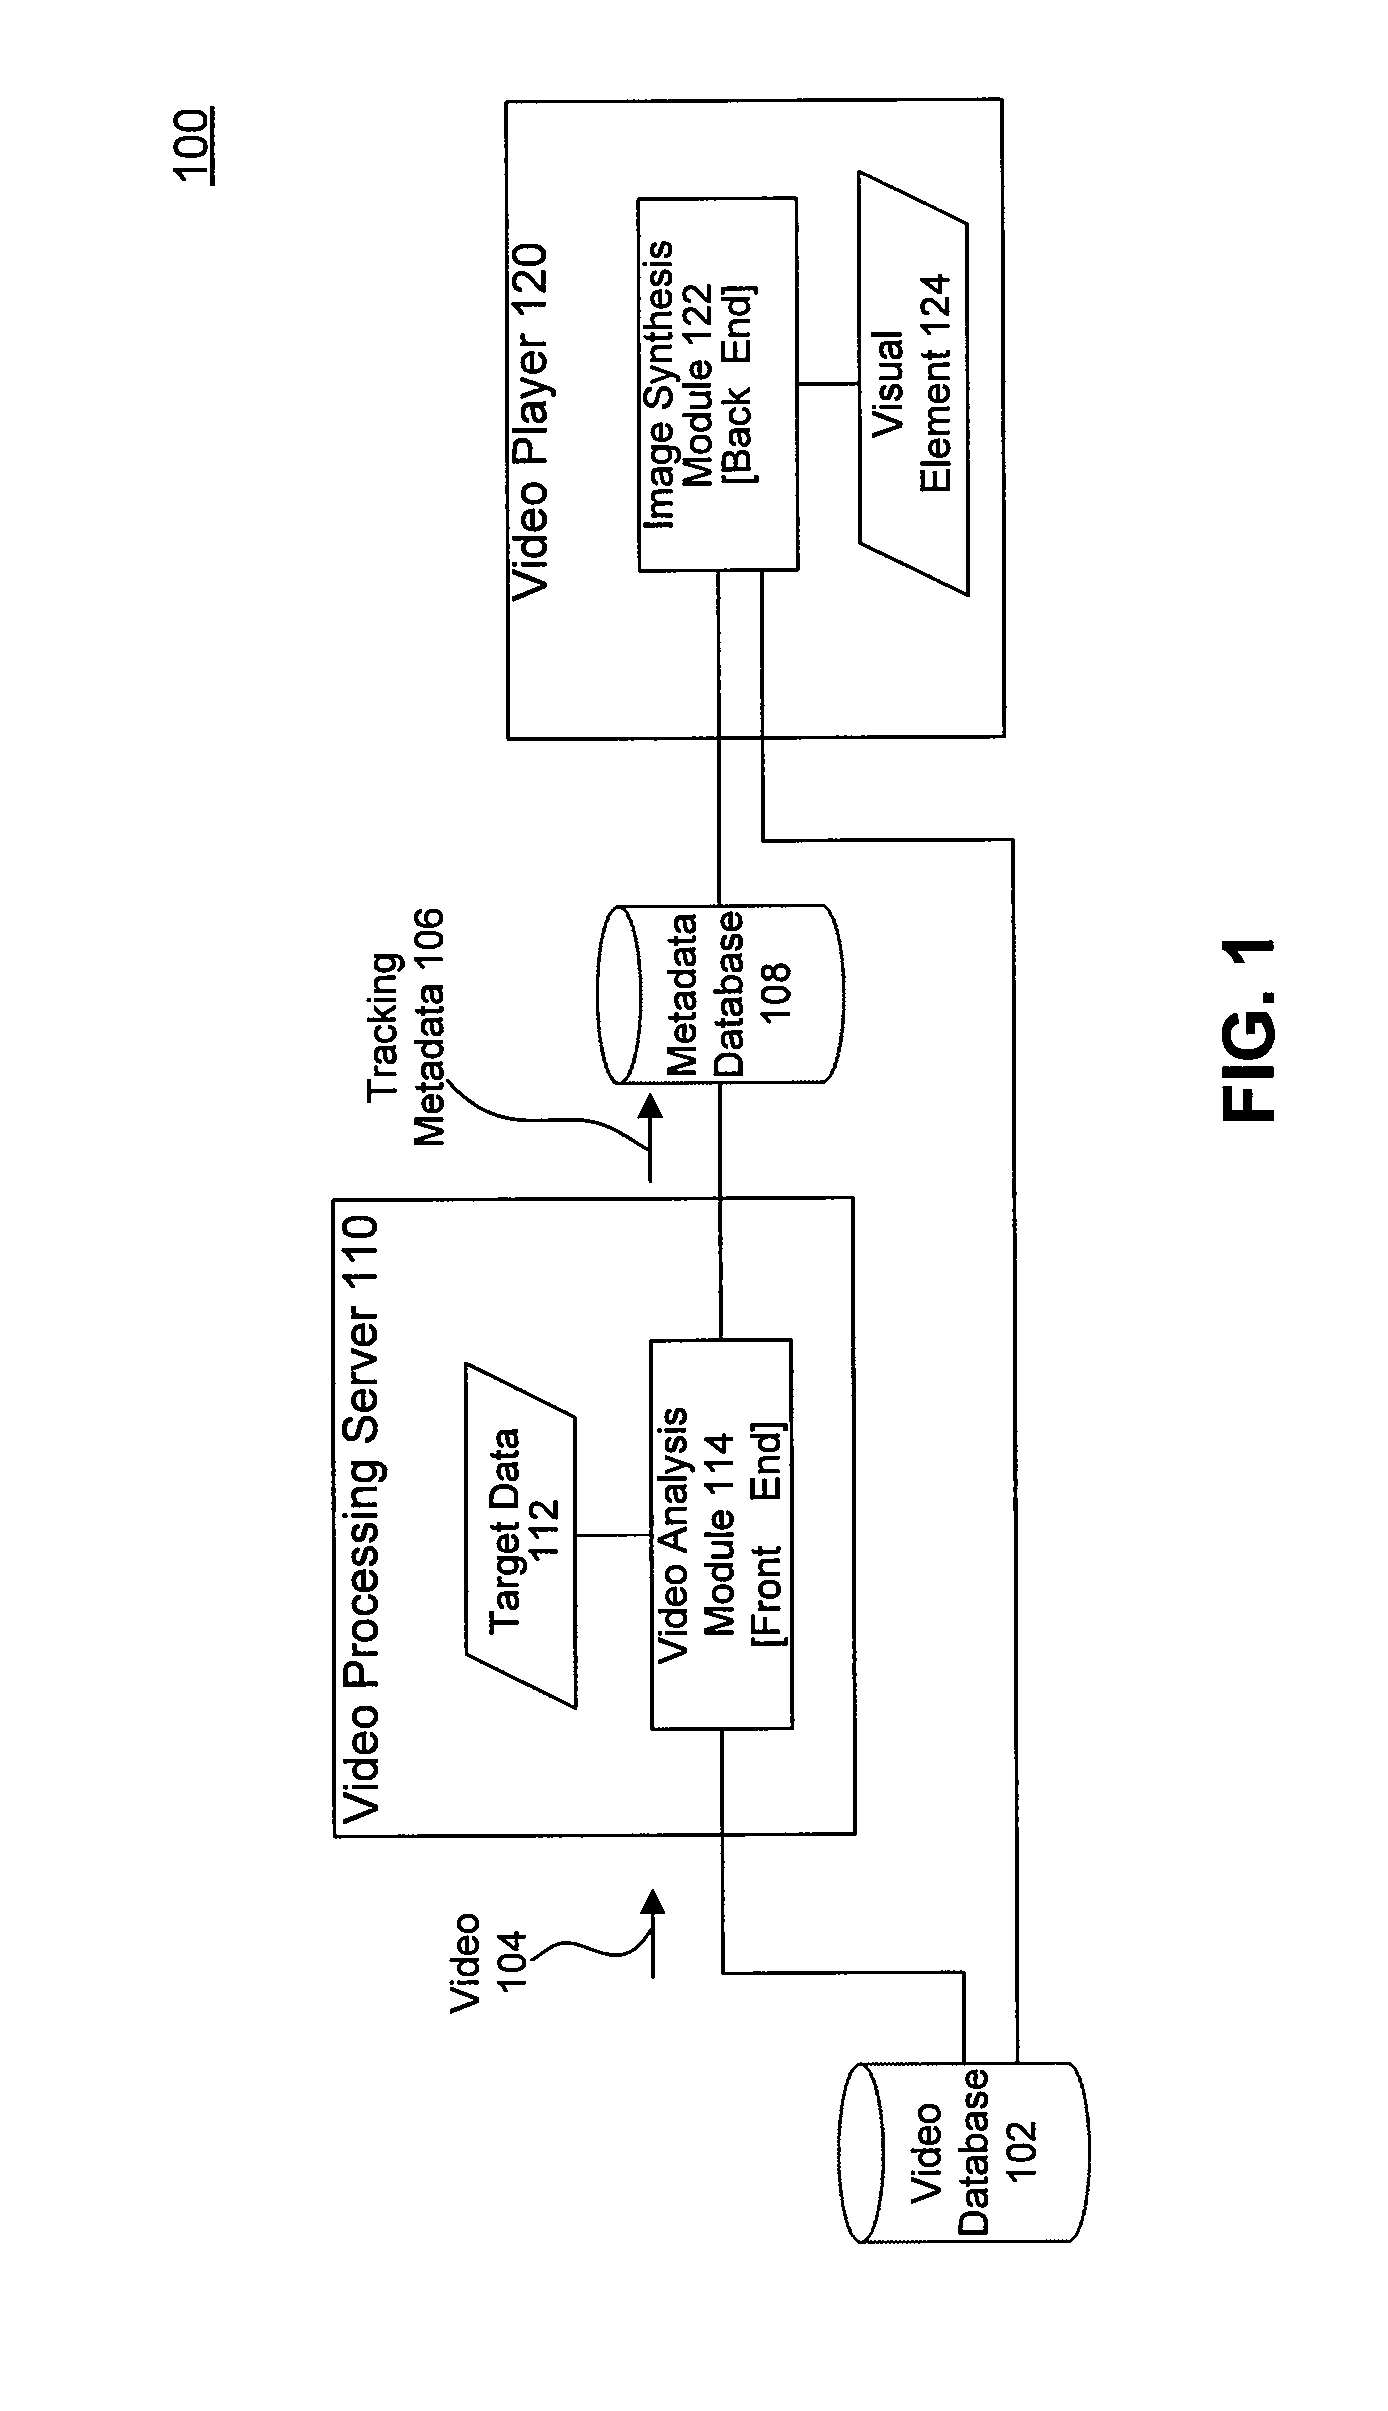 Preprocessing Video to Insert Visual Elements and Applications Thereof